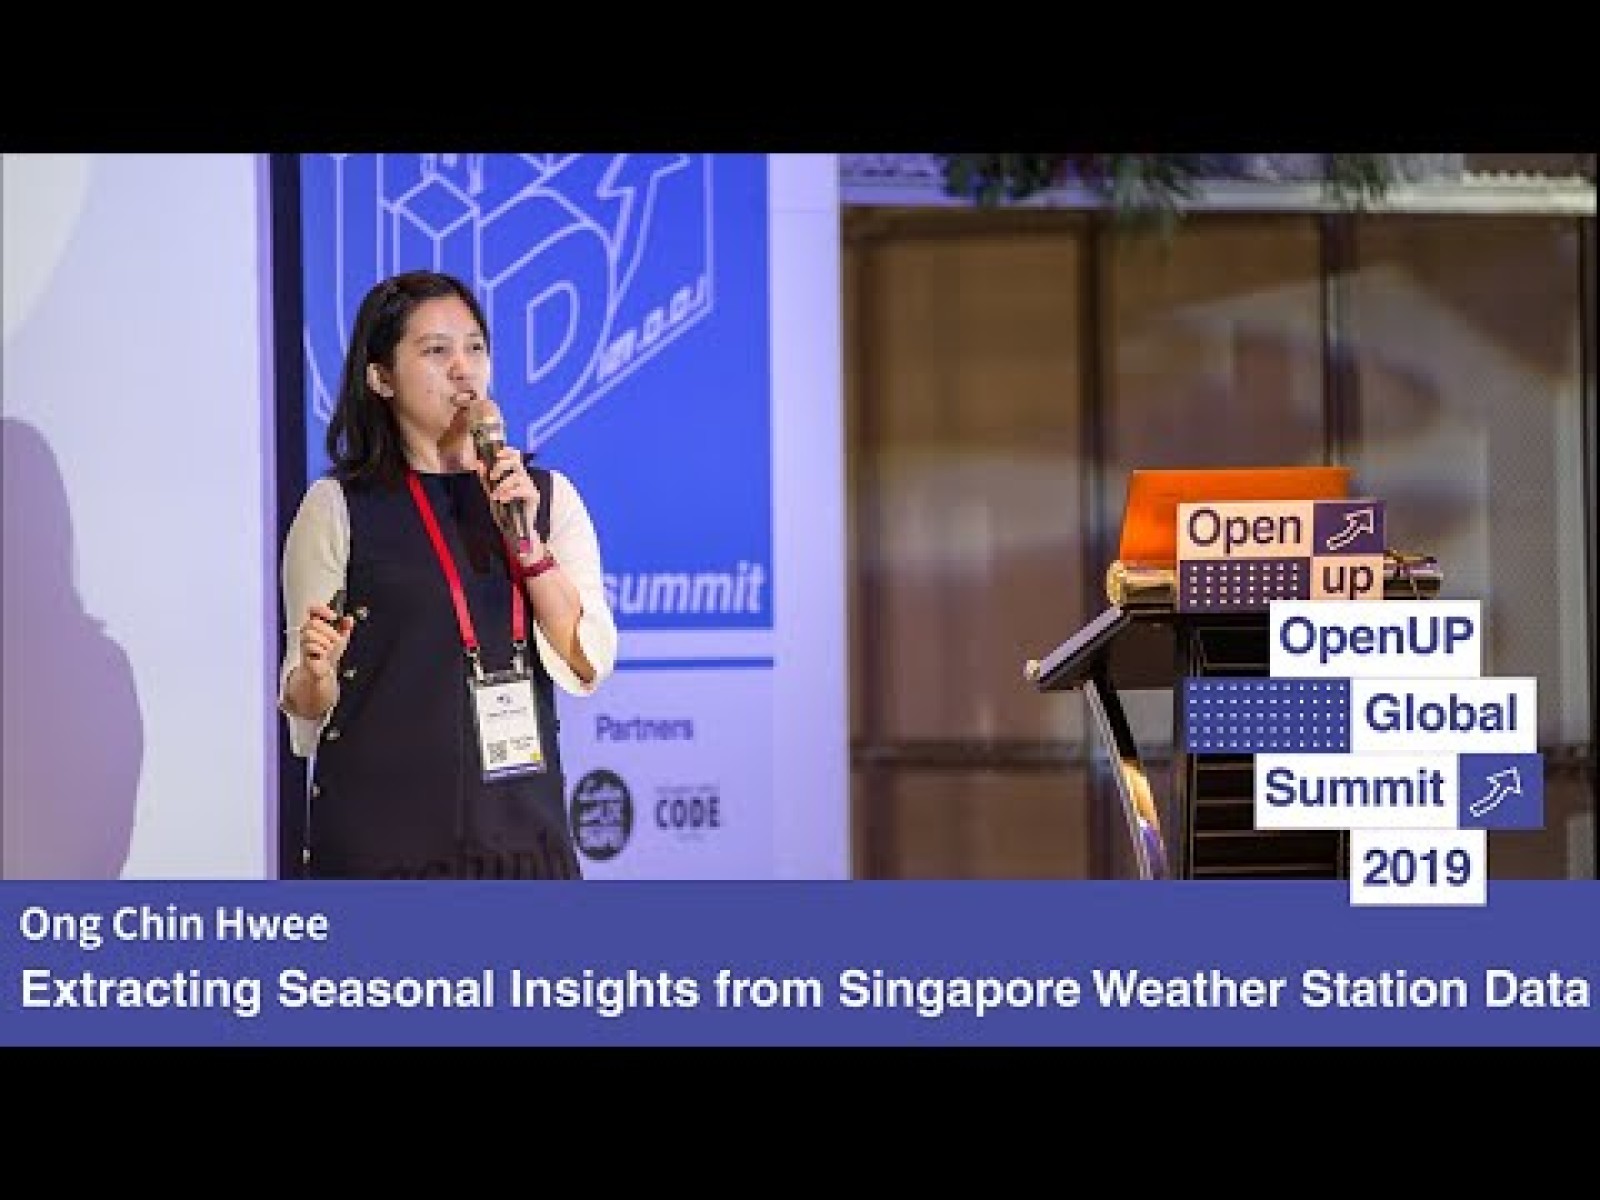 Making Open Weather Data More Accessible: Extracting Seasonal Insights from Singapore Weather Station Data